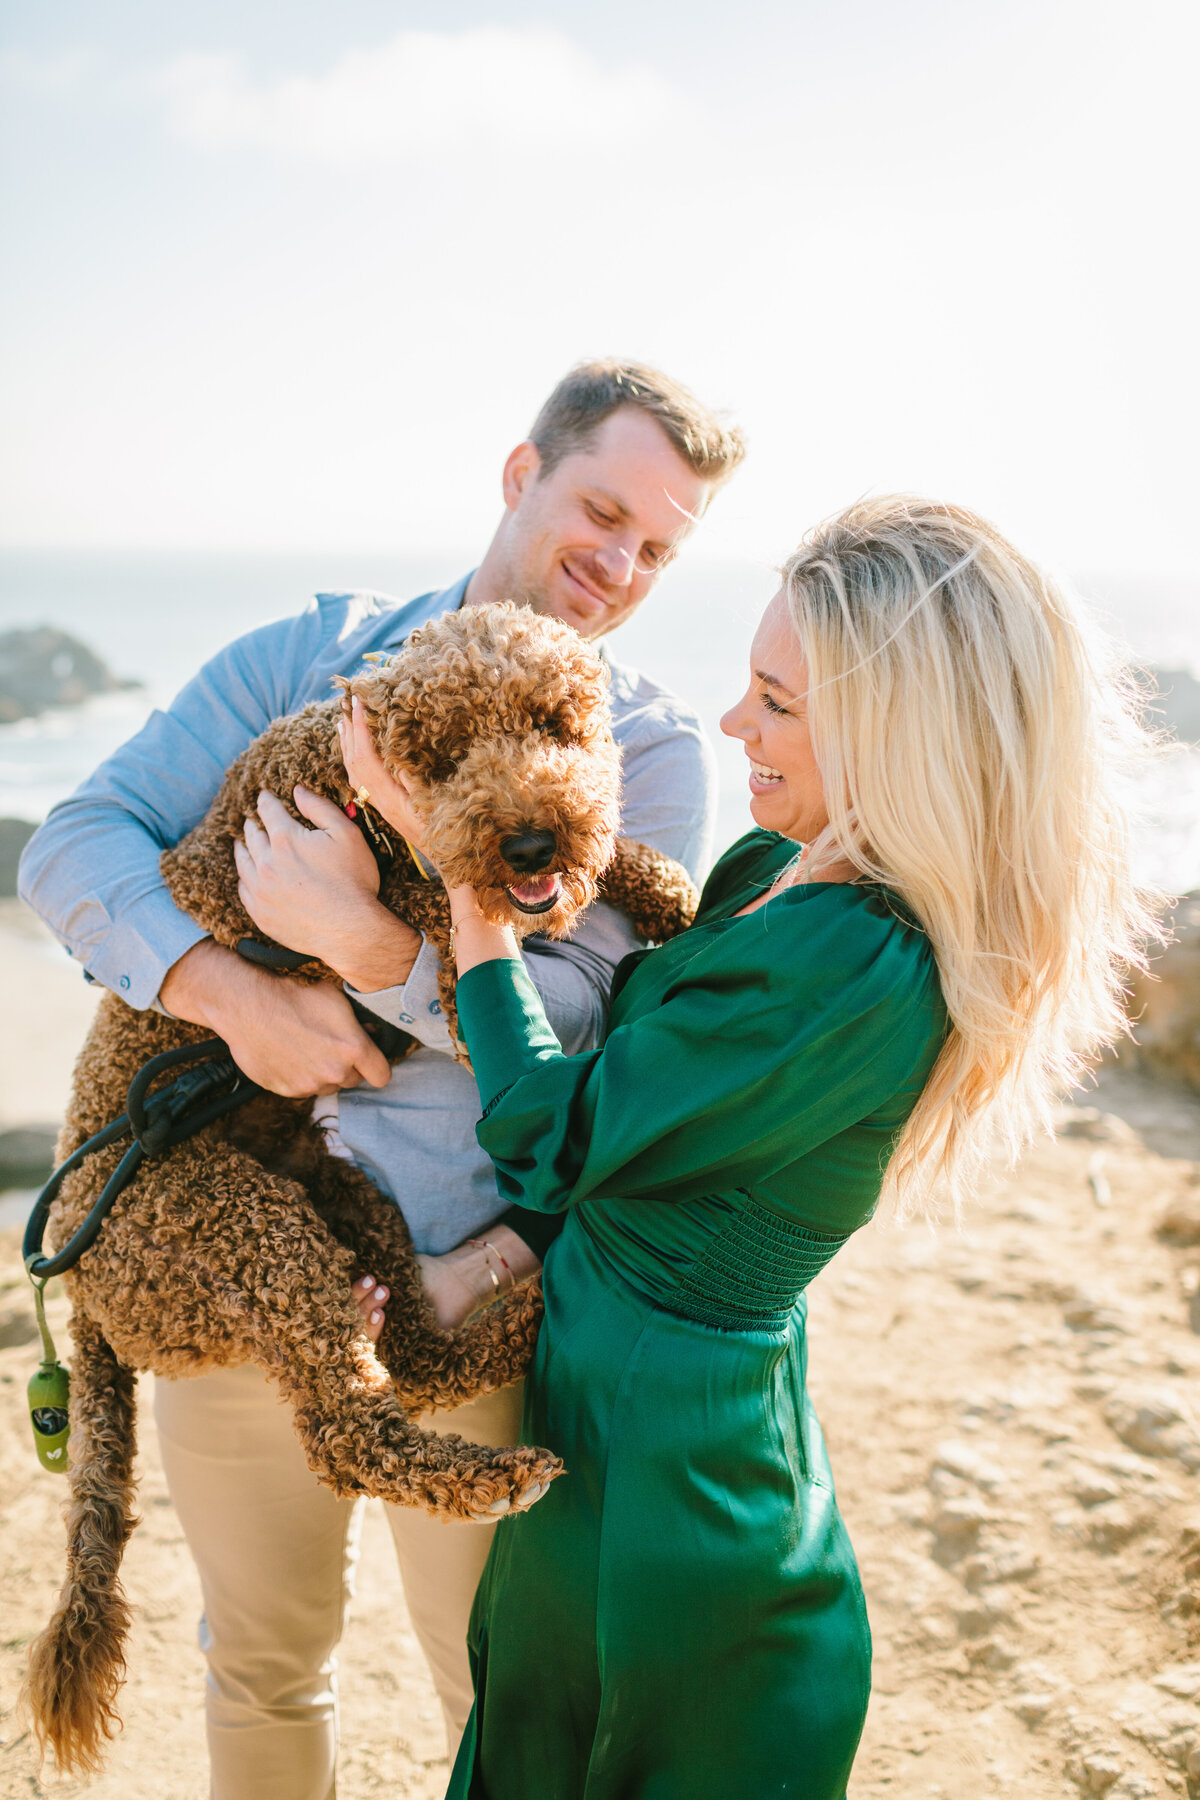 Best California and Texas Engagement Photographer-Jodee Debes Photography-237